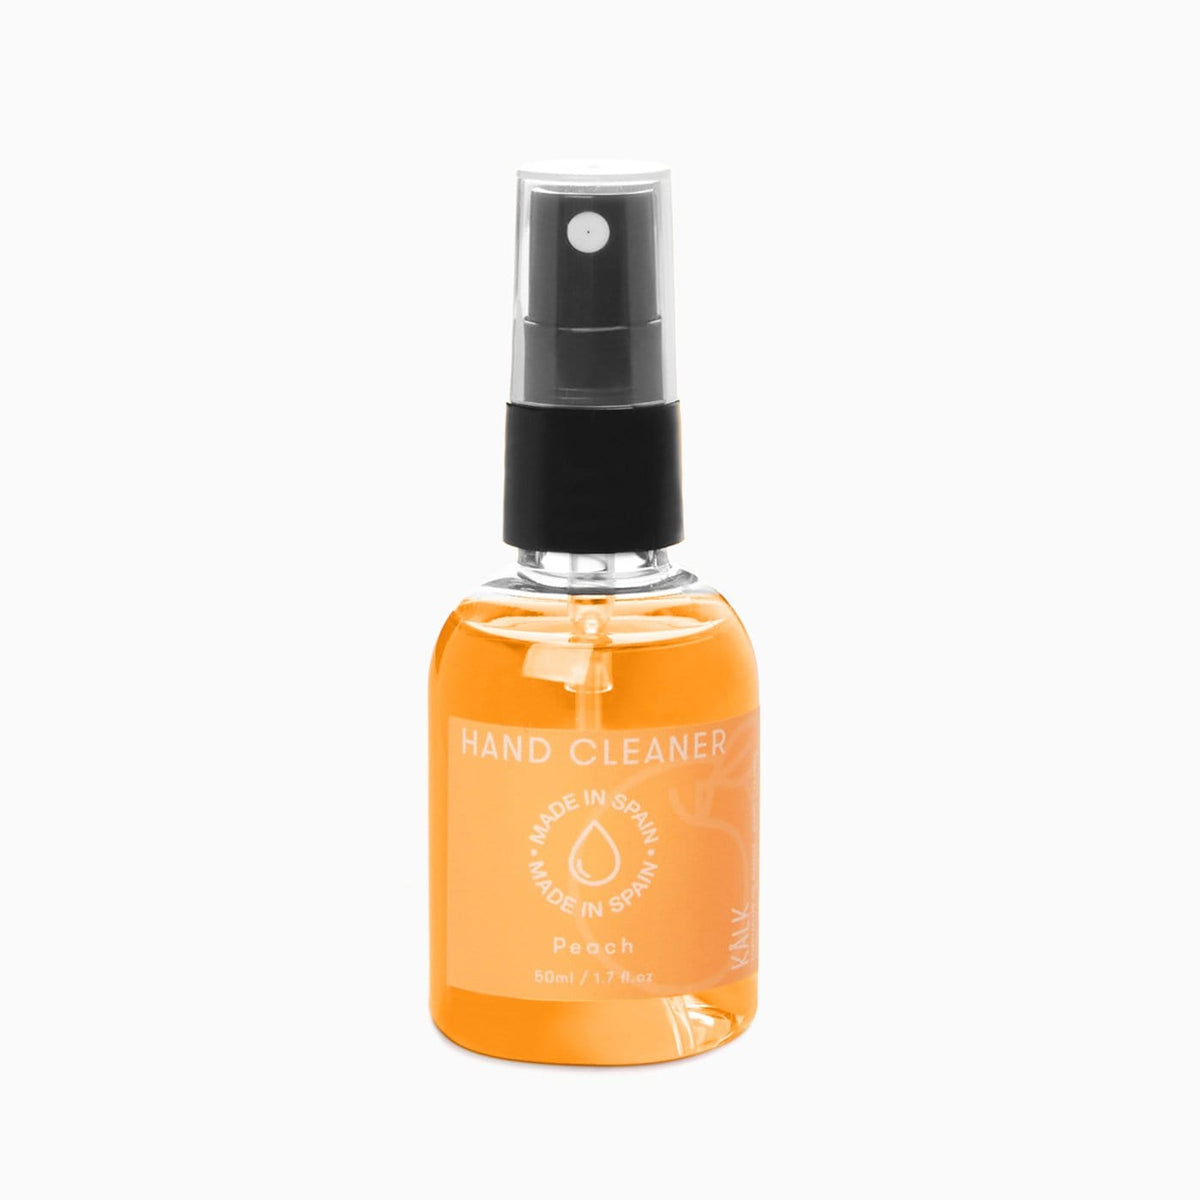 Hand Cleaner Spray Apricot